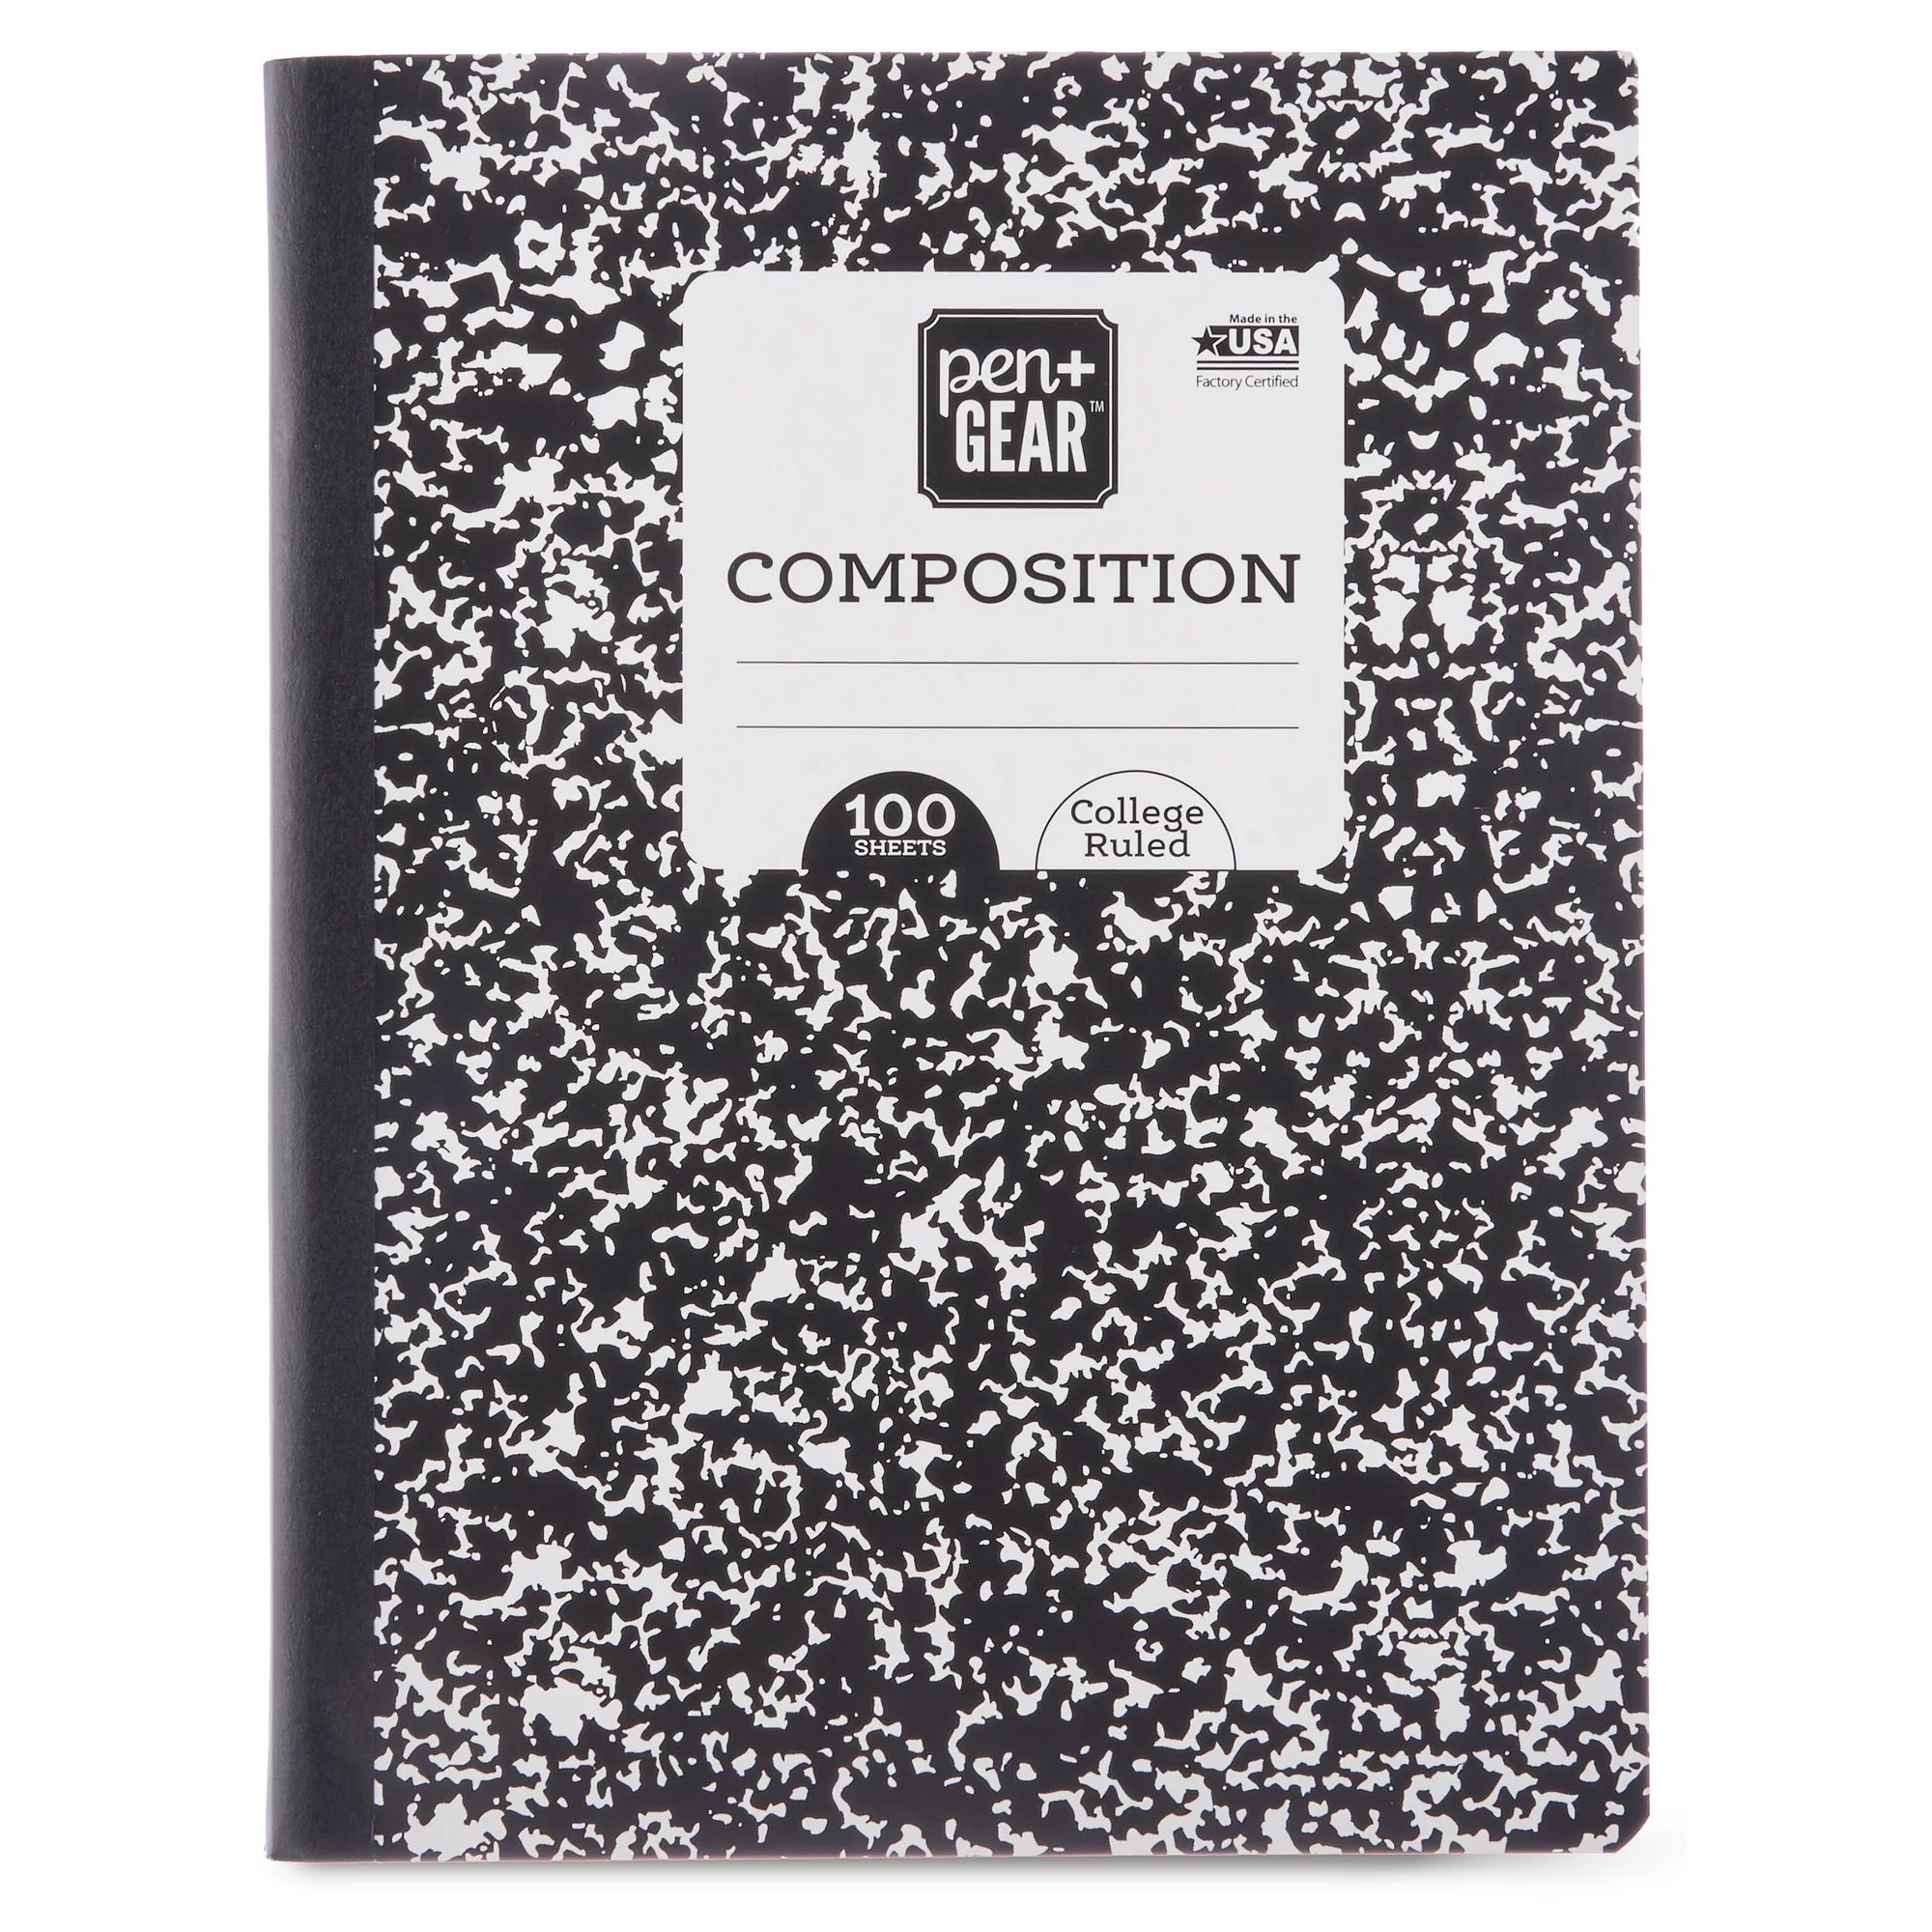 Pen + Gear Composition Book, College Ruled, 100 Pages | Walmart (US)